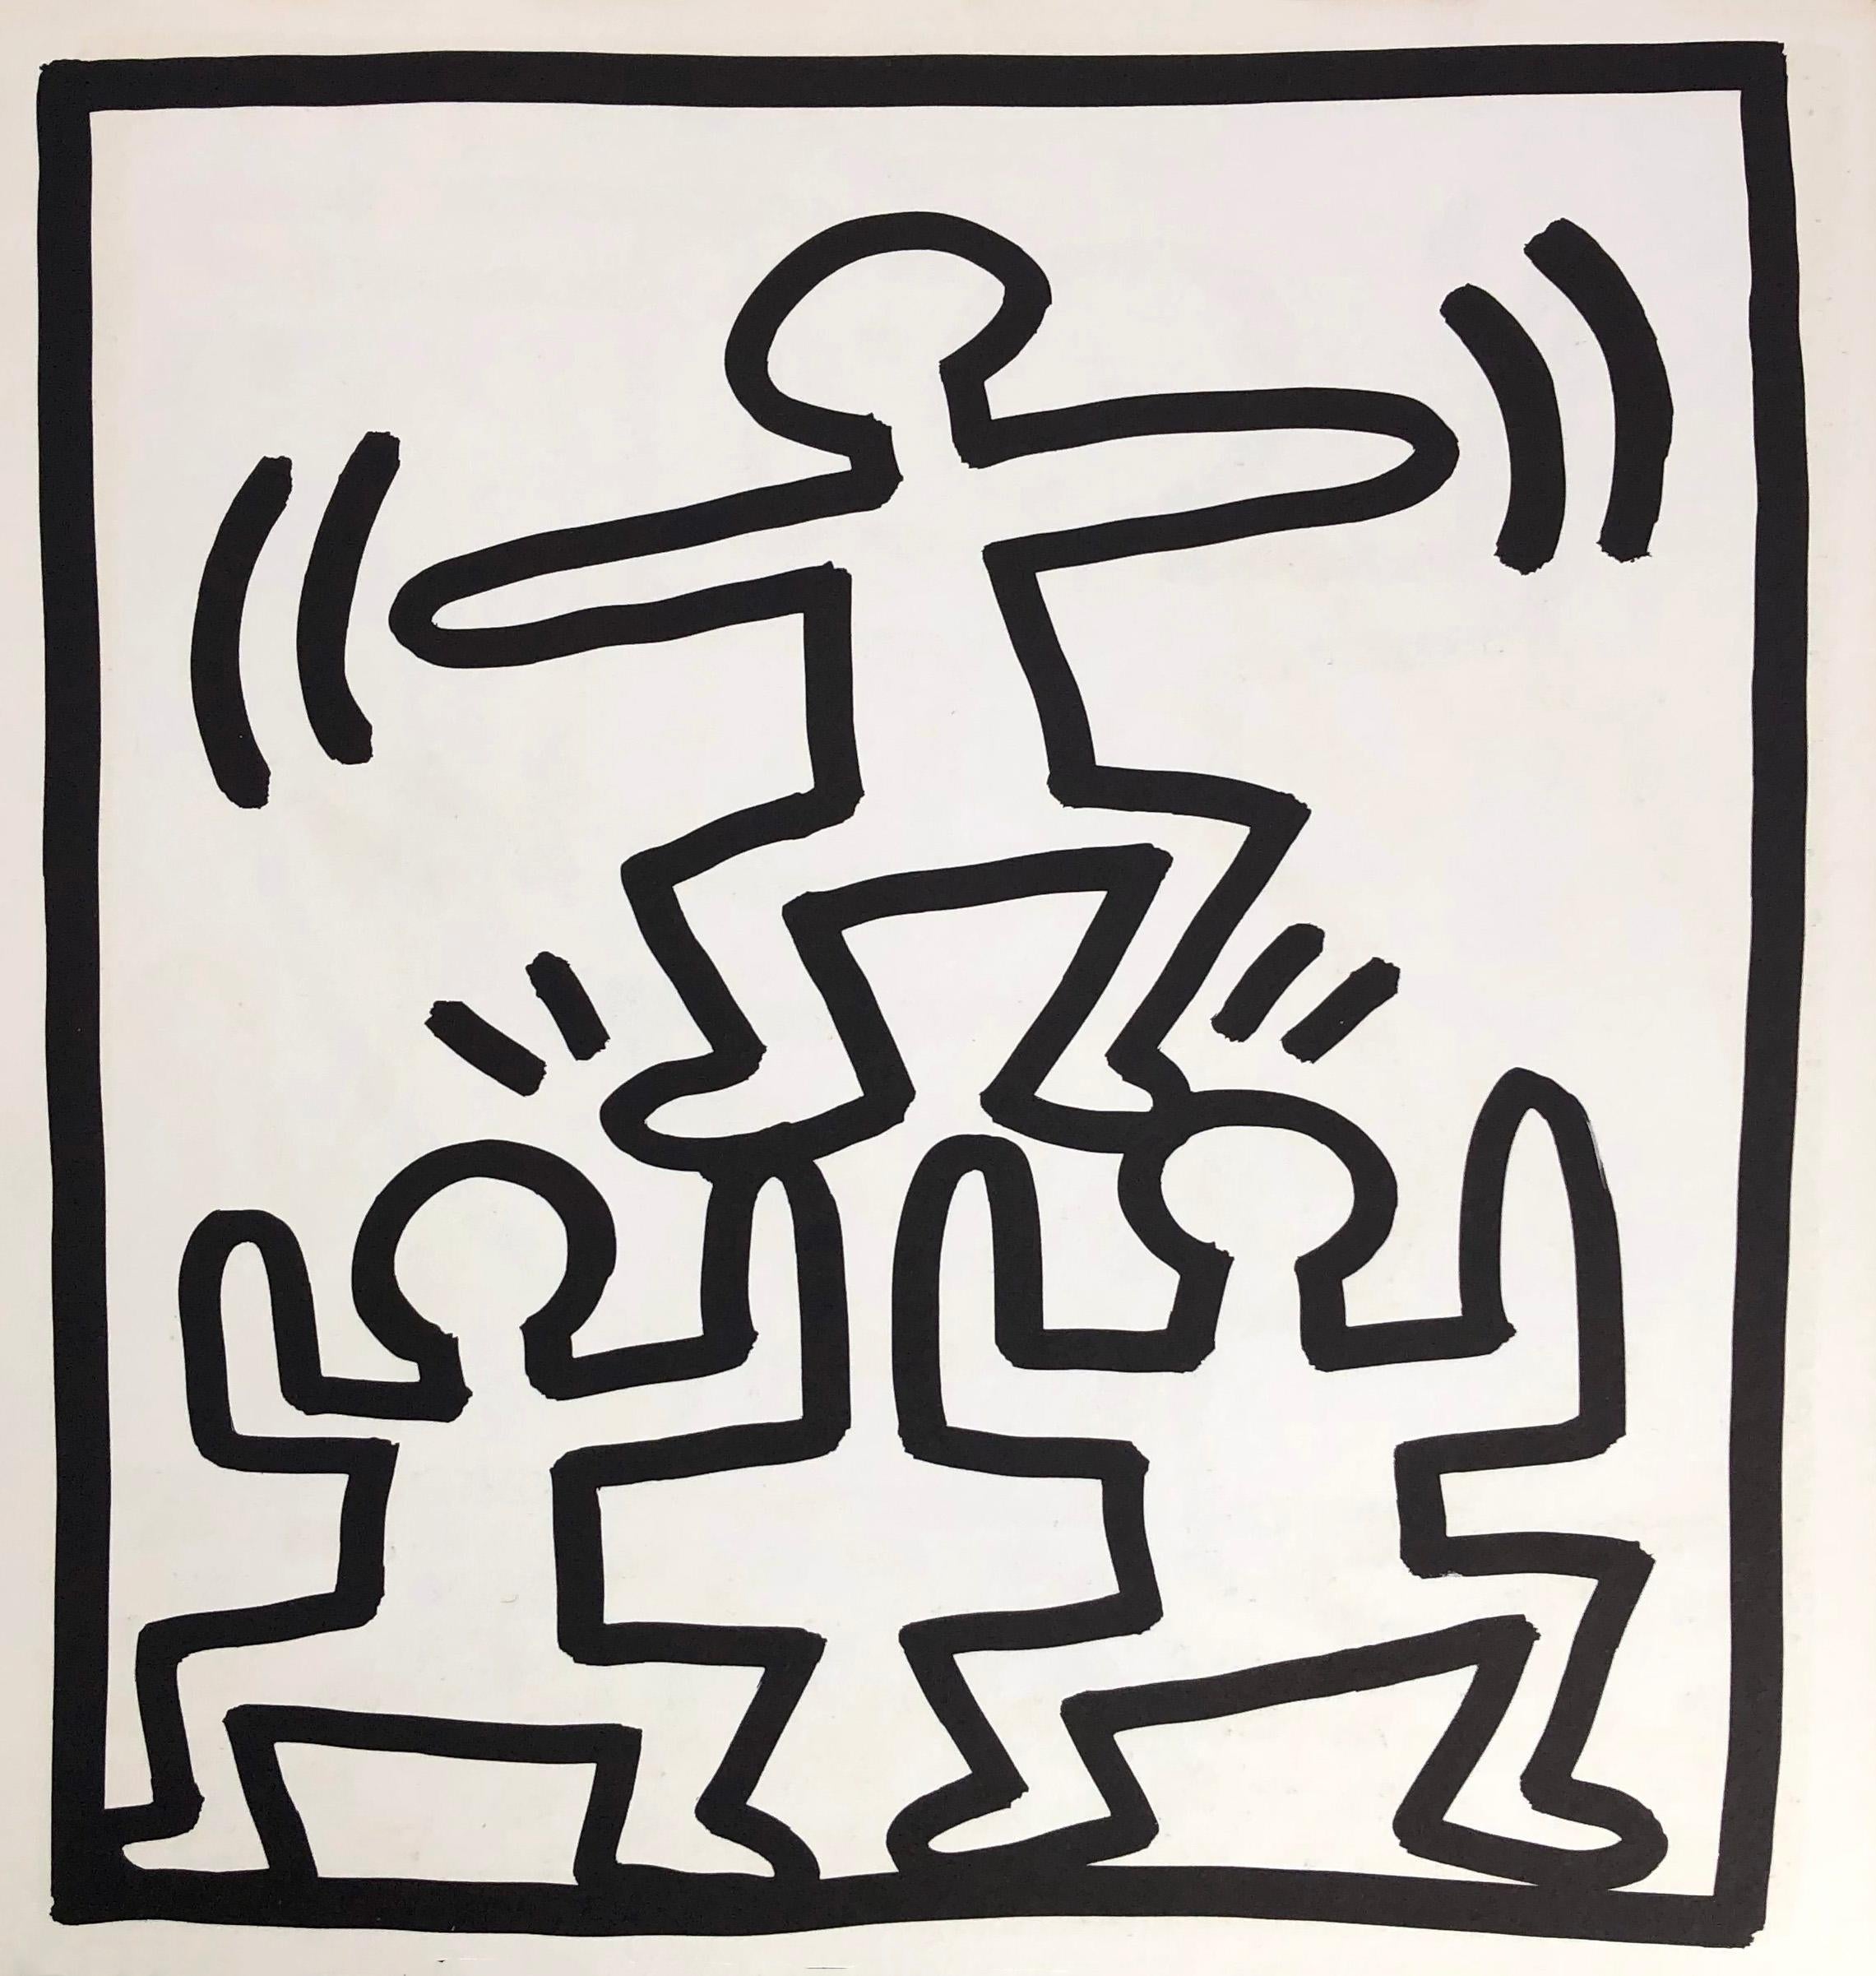 Keith Haring Lithograph 1982
Double-sided offset lithograph published by Tony Shafrazi Gallery, New York, 1982 from an edition of 2000. 

Single sheet lithograph from the seminal spiral bound, early monograph showcasing Haring's work. 9 x 9